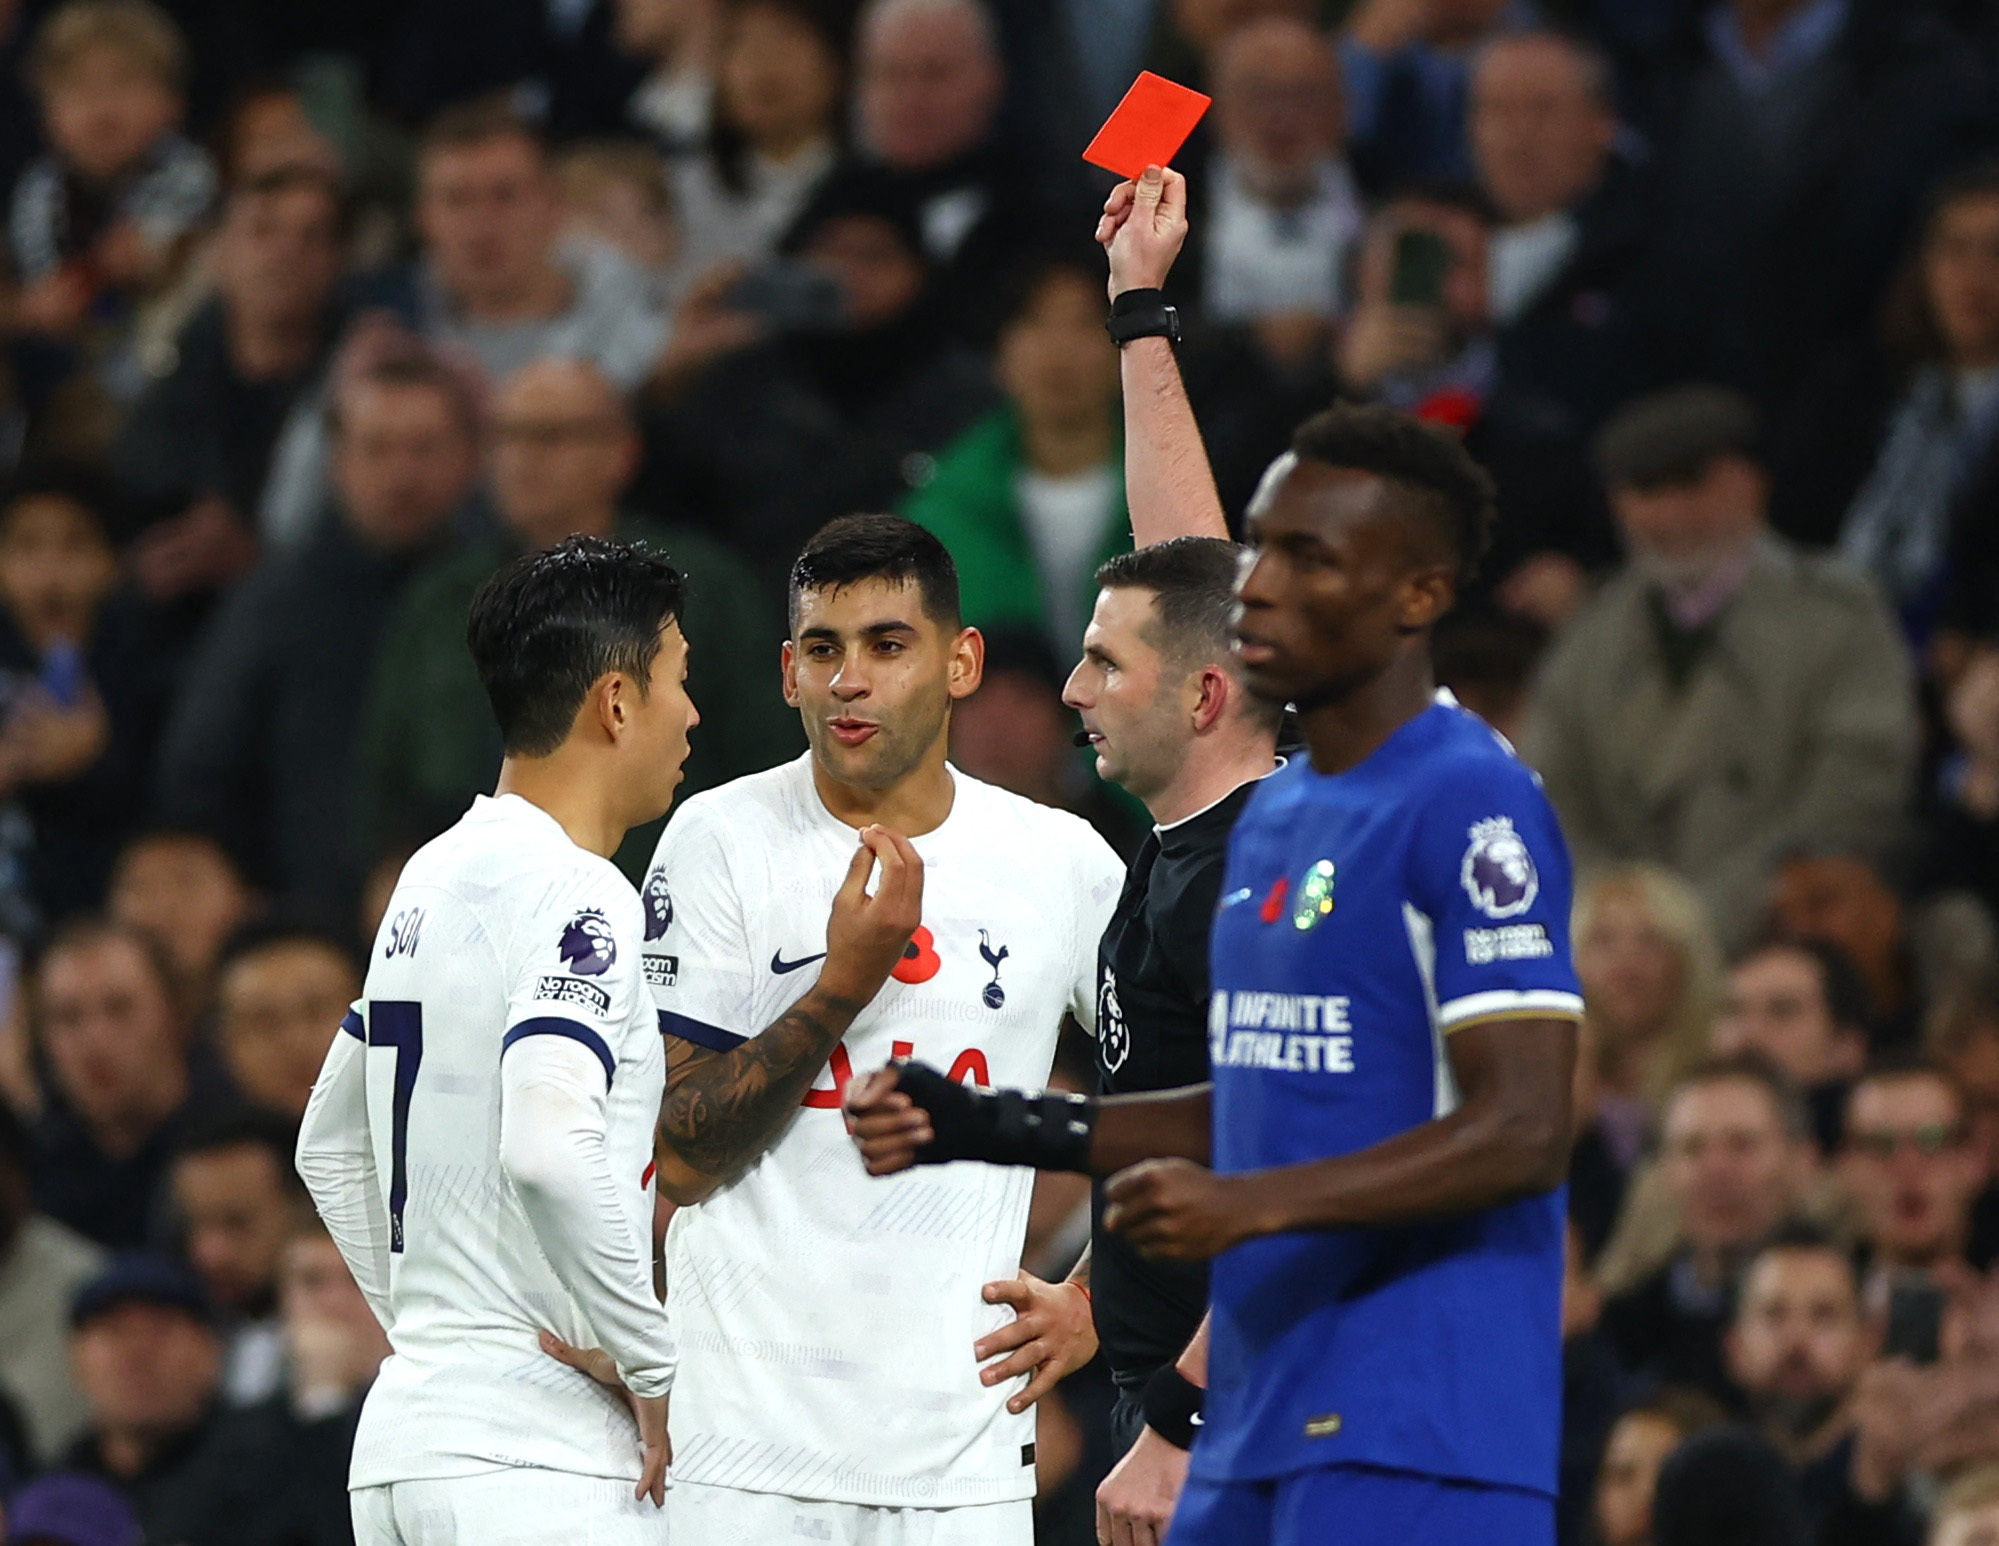 Nine-man Spurs miss out on top spot in chaotic 4-1 loss to Chelsea